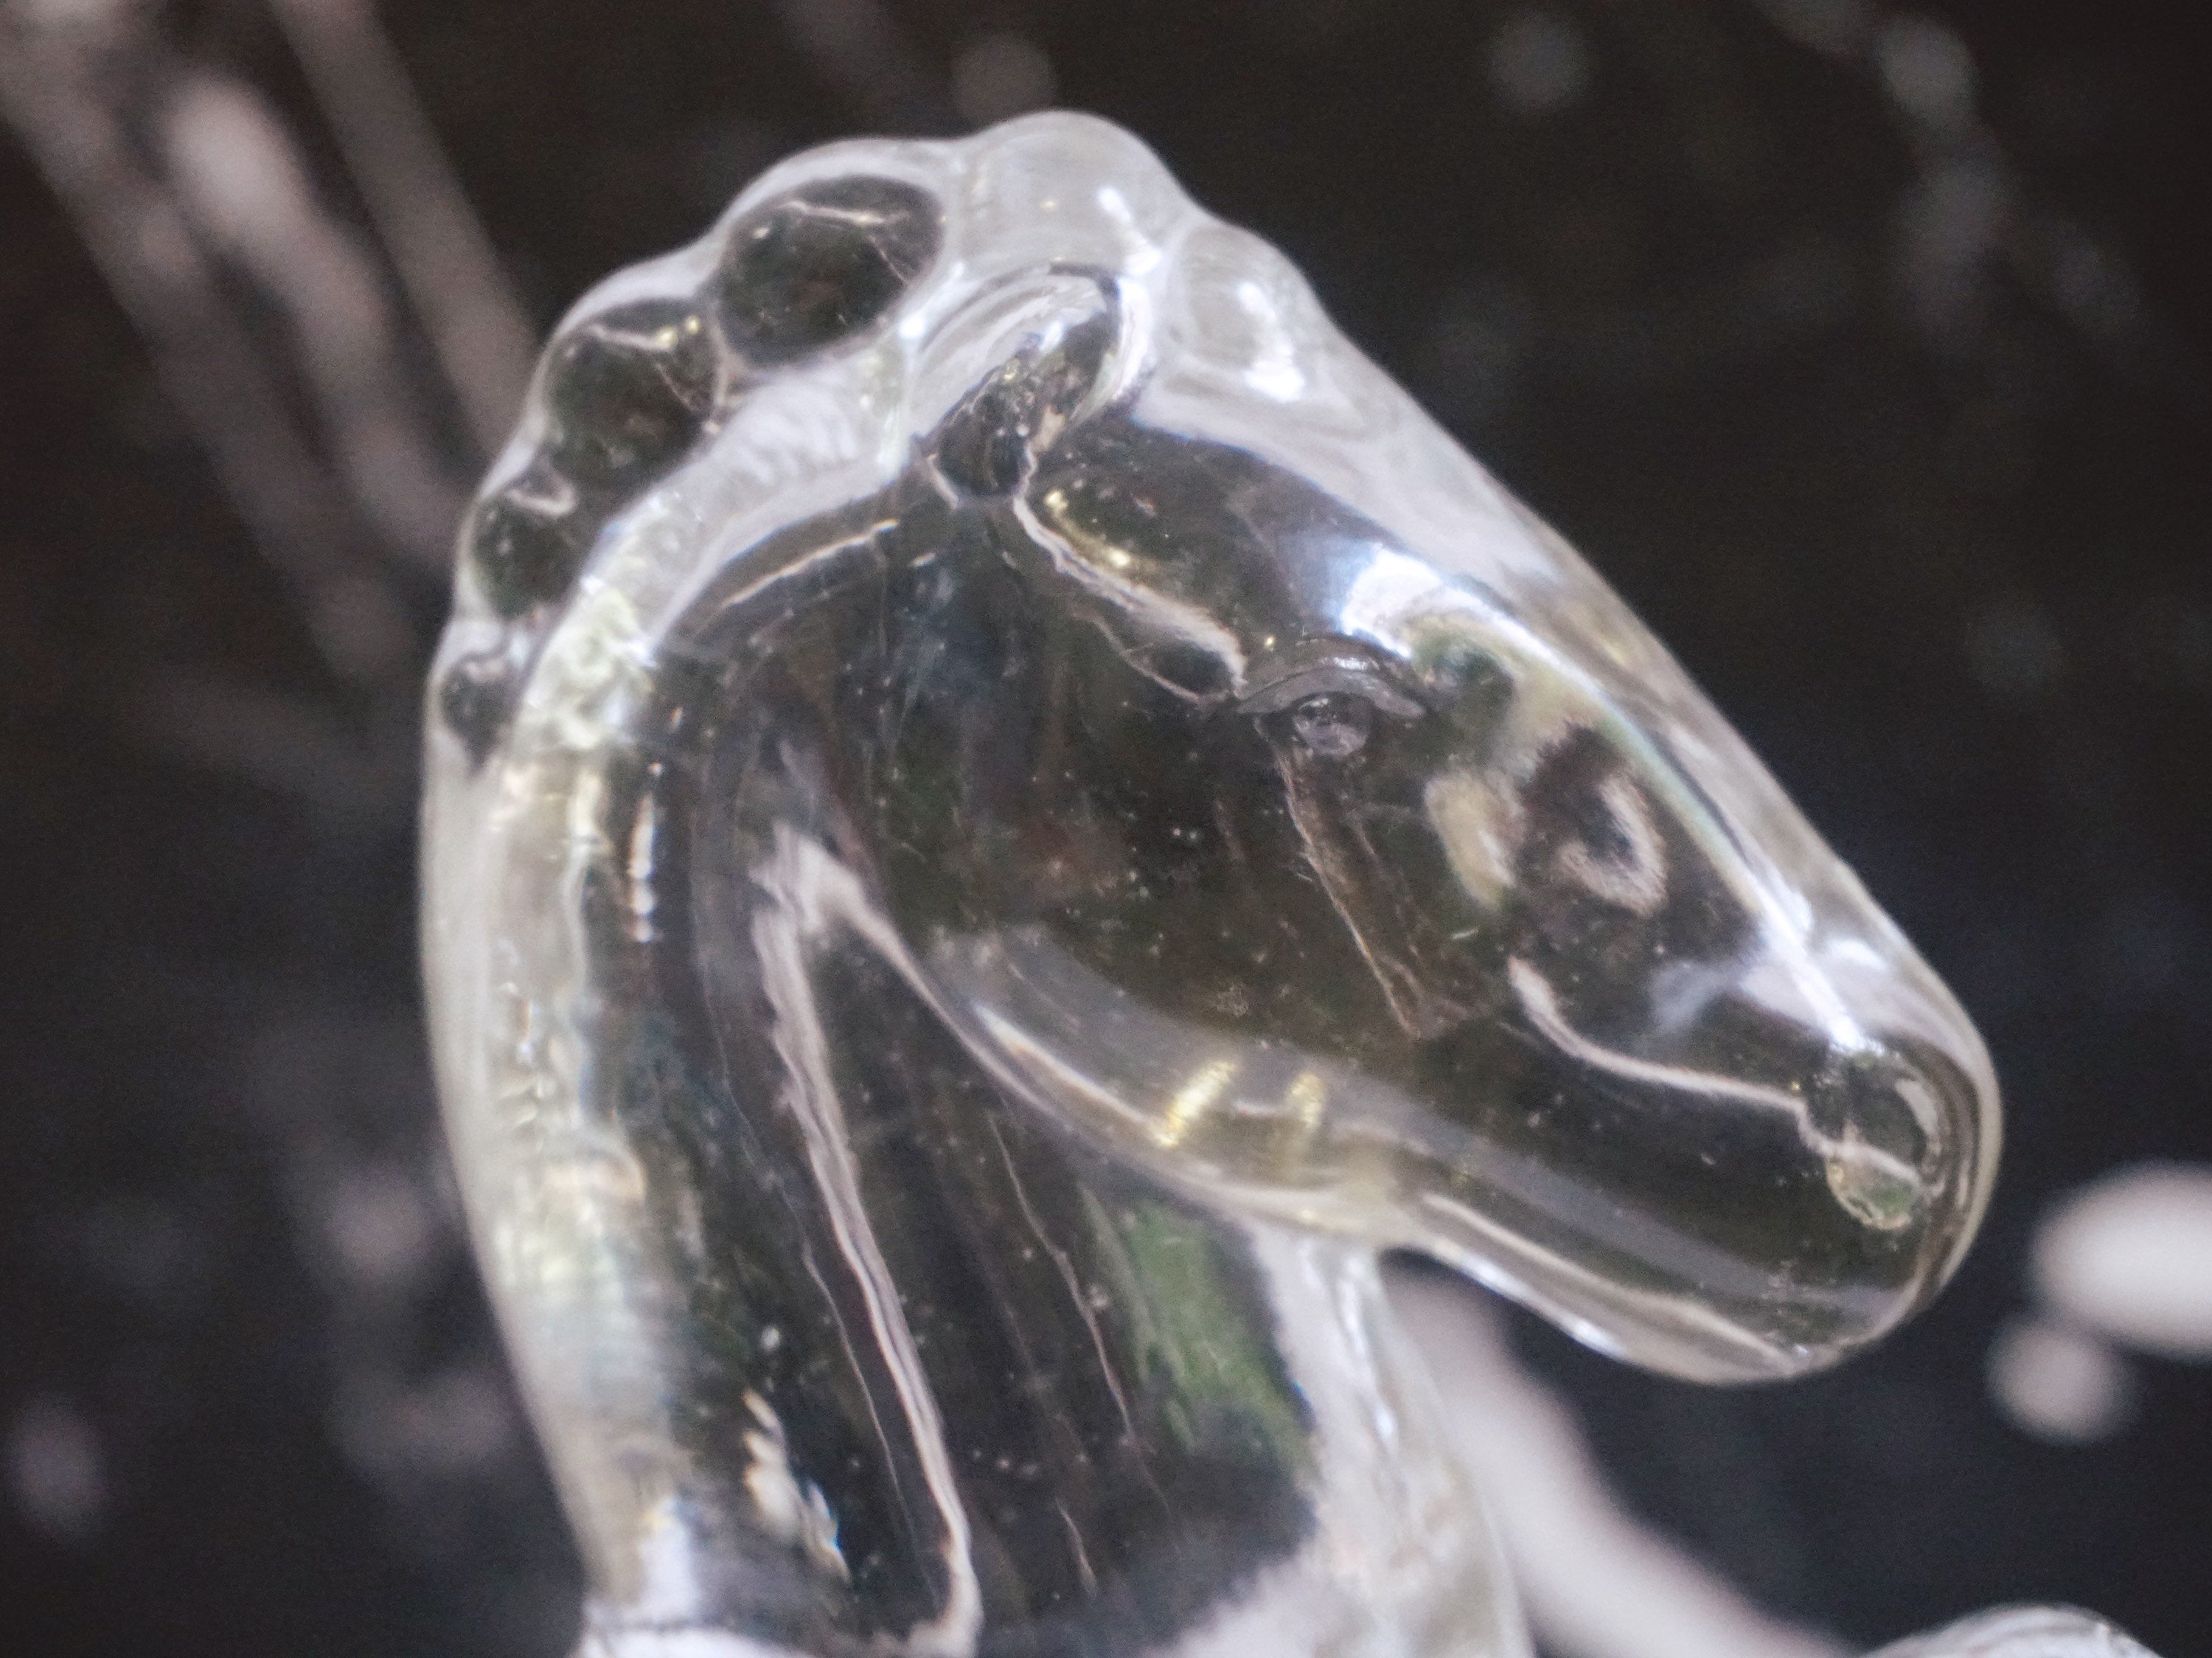 Pair of Vintage 1940s Clear Glass Rearing Horse Bookends By L.E. Smith - Urban Nomad NYC